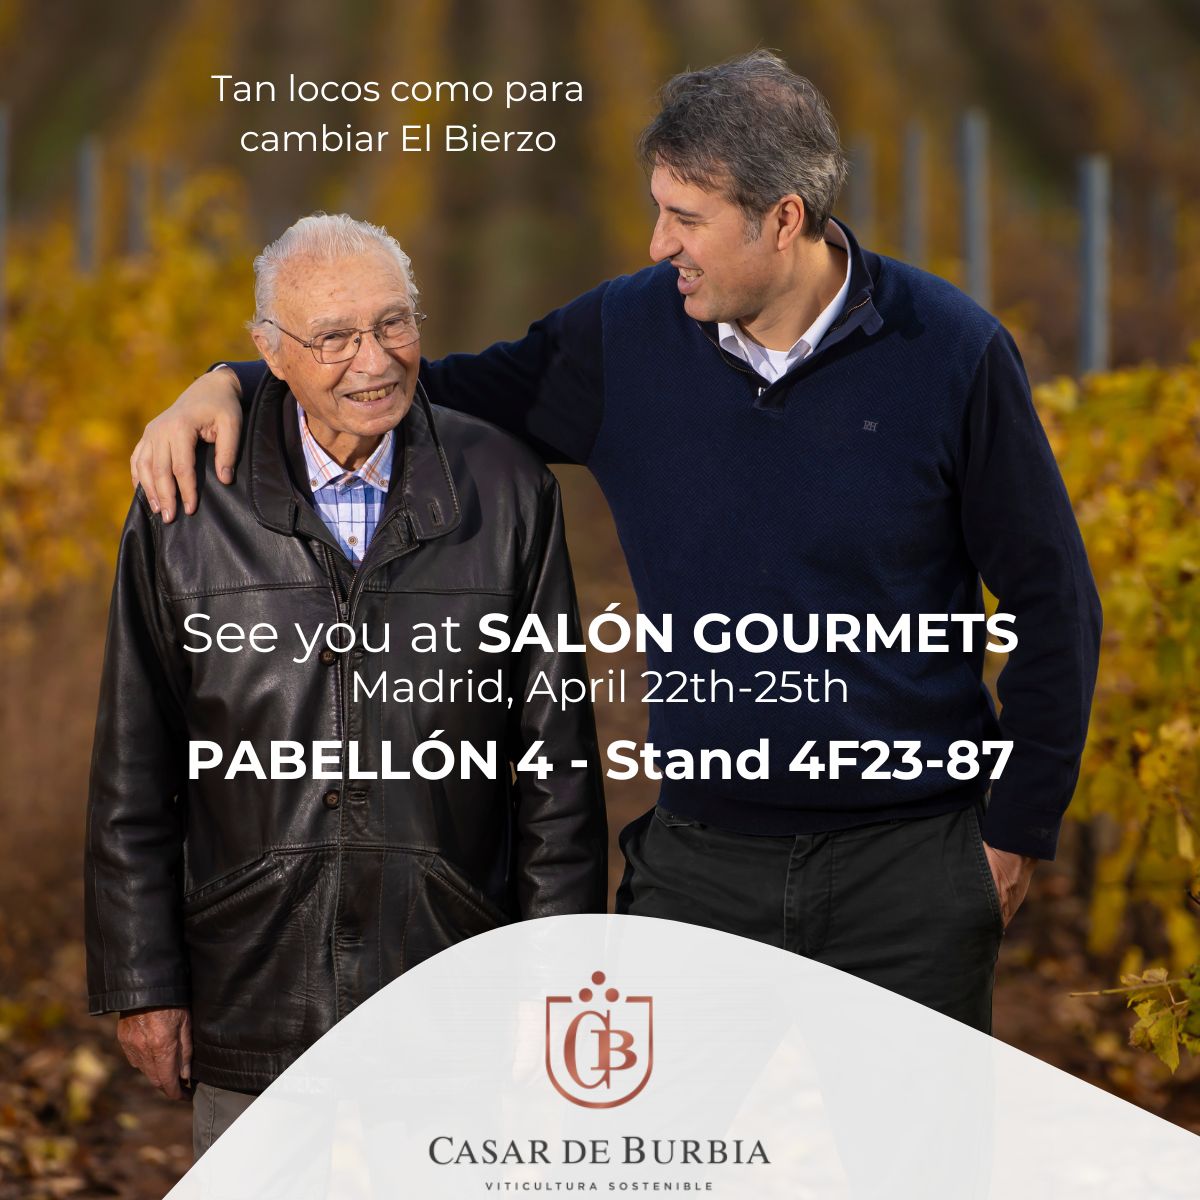 Next week CASAR DE BURBIA will be exhibiting at Salón Gourmets in Madrid and we are looking forward to tasting with you our new 'Vinos de Paraje' collection: casardeburbia.com/organic-wines/…

❤️ Visit Us: PABELLÓN 4 - Stand 4F23-87

#casardeburbia #salongourmets #organicwines #vino #wine